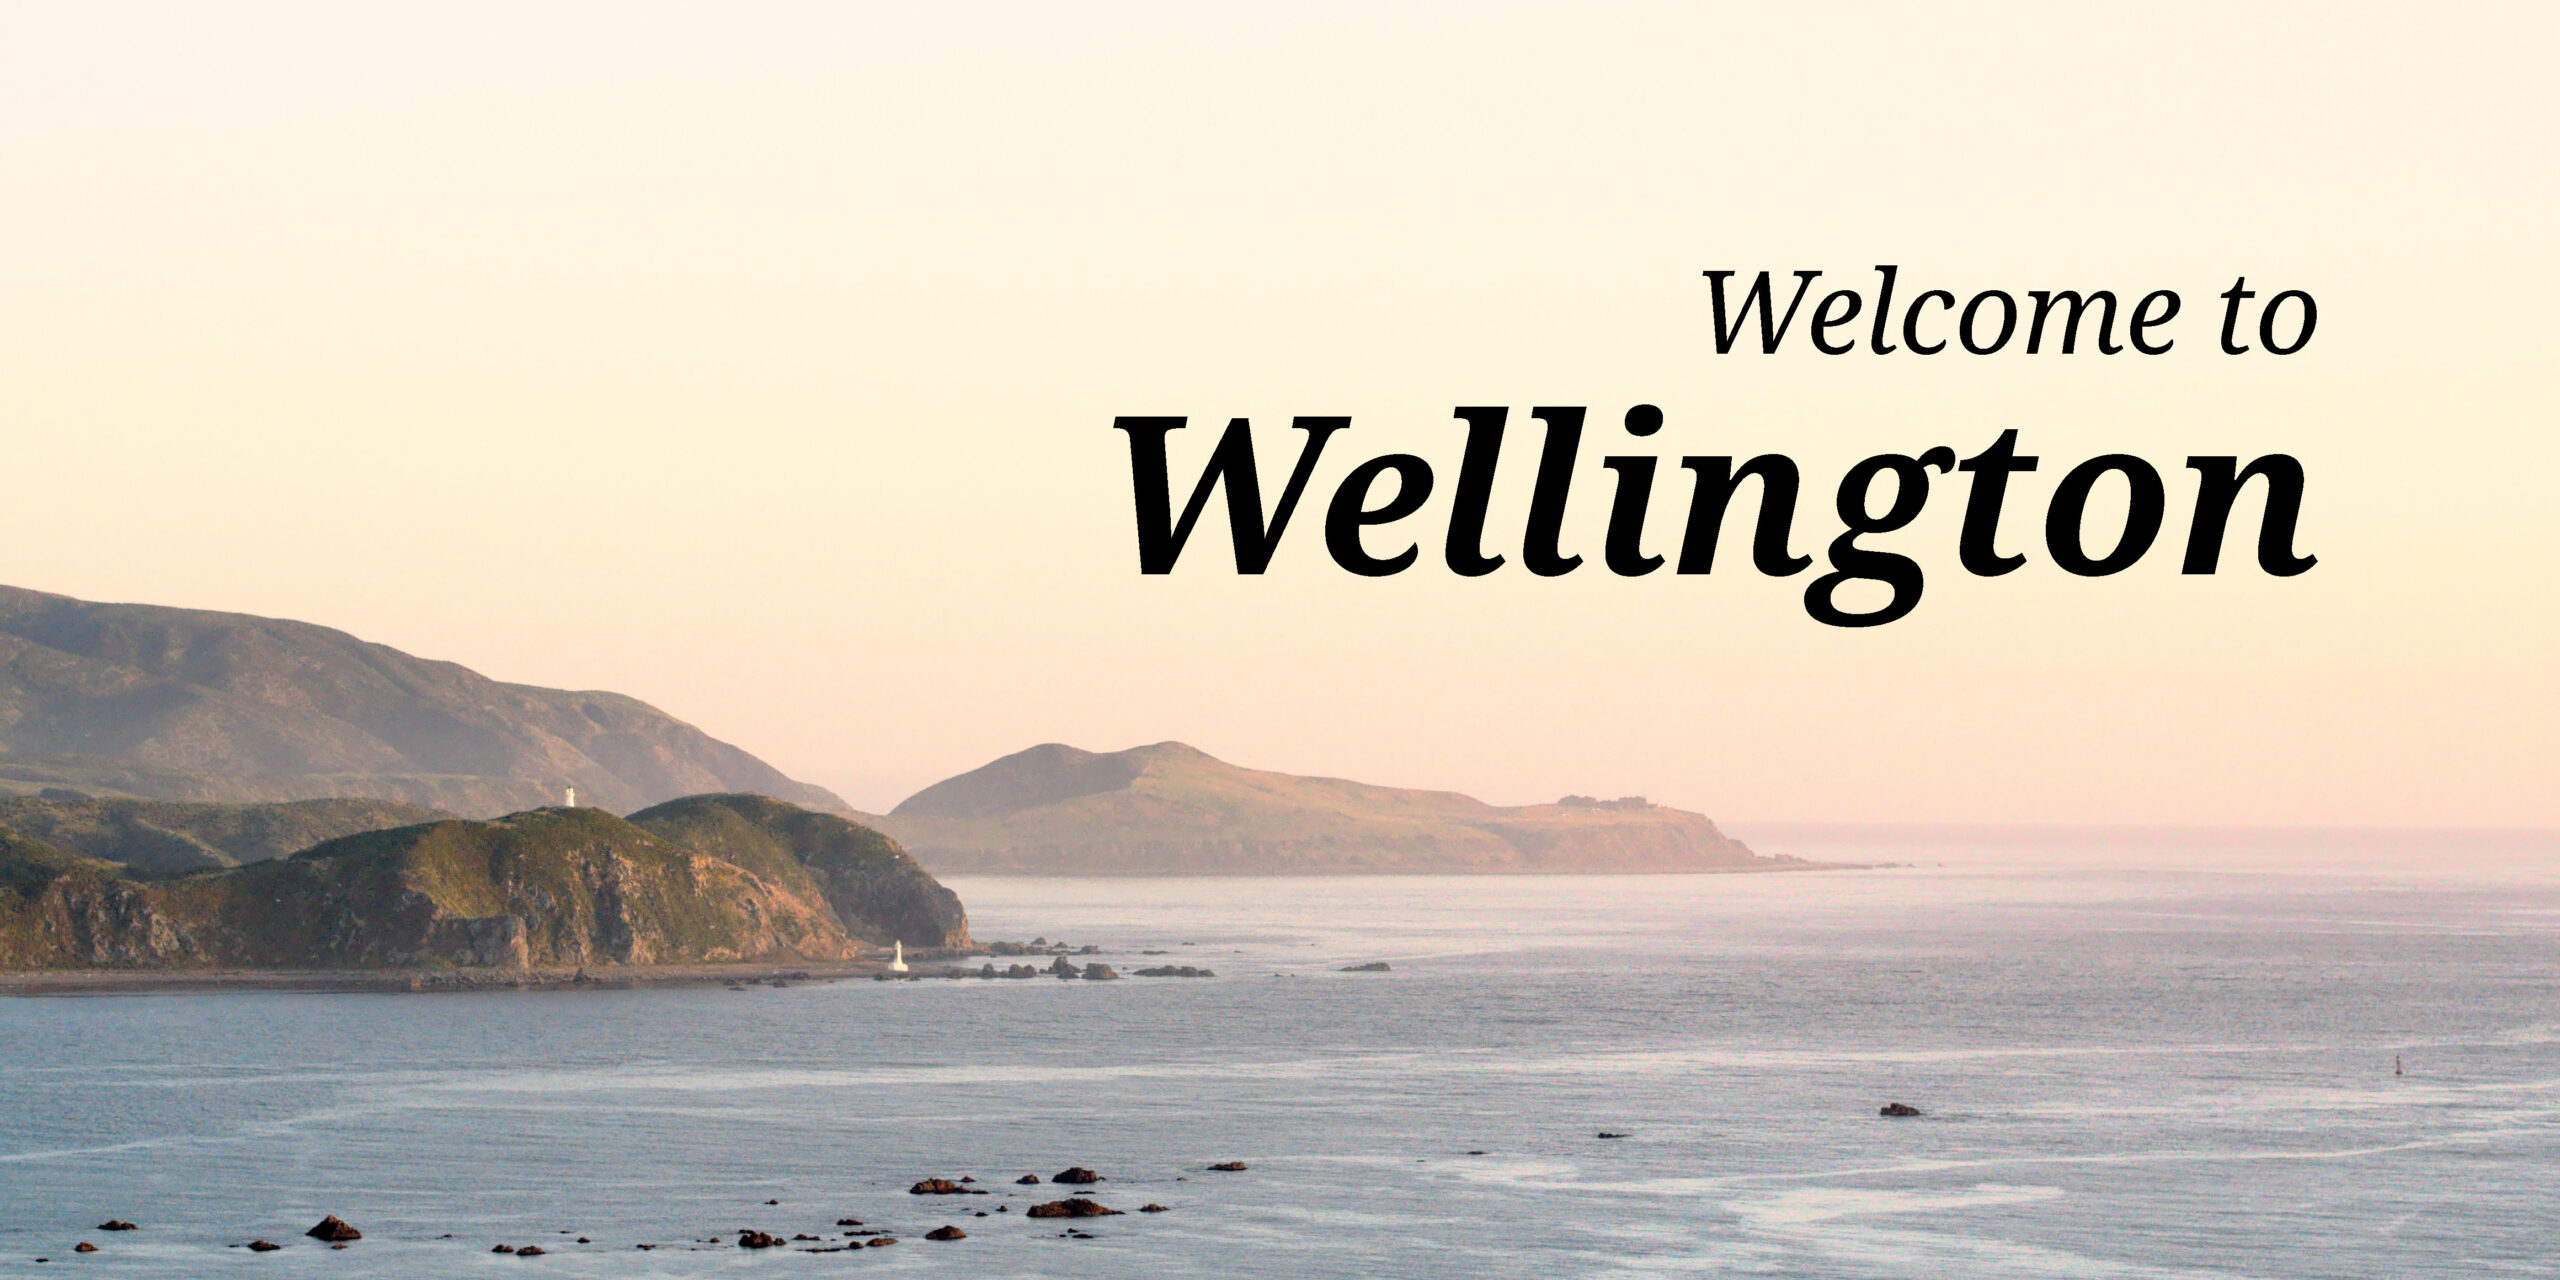 A photo of the entrance to Wellington harbour with the words "Welcome to Wellington"